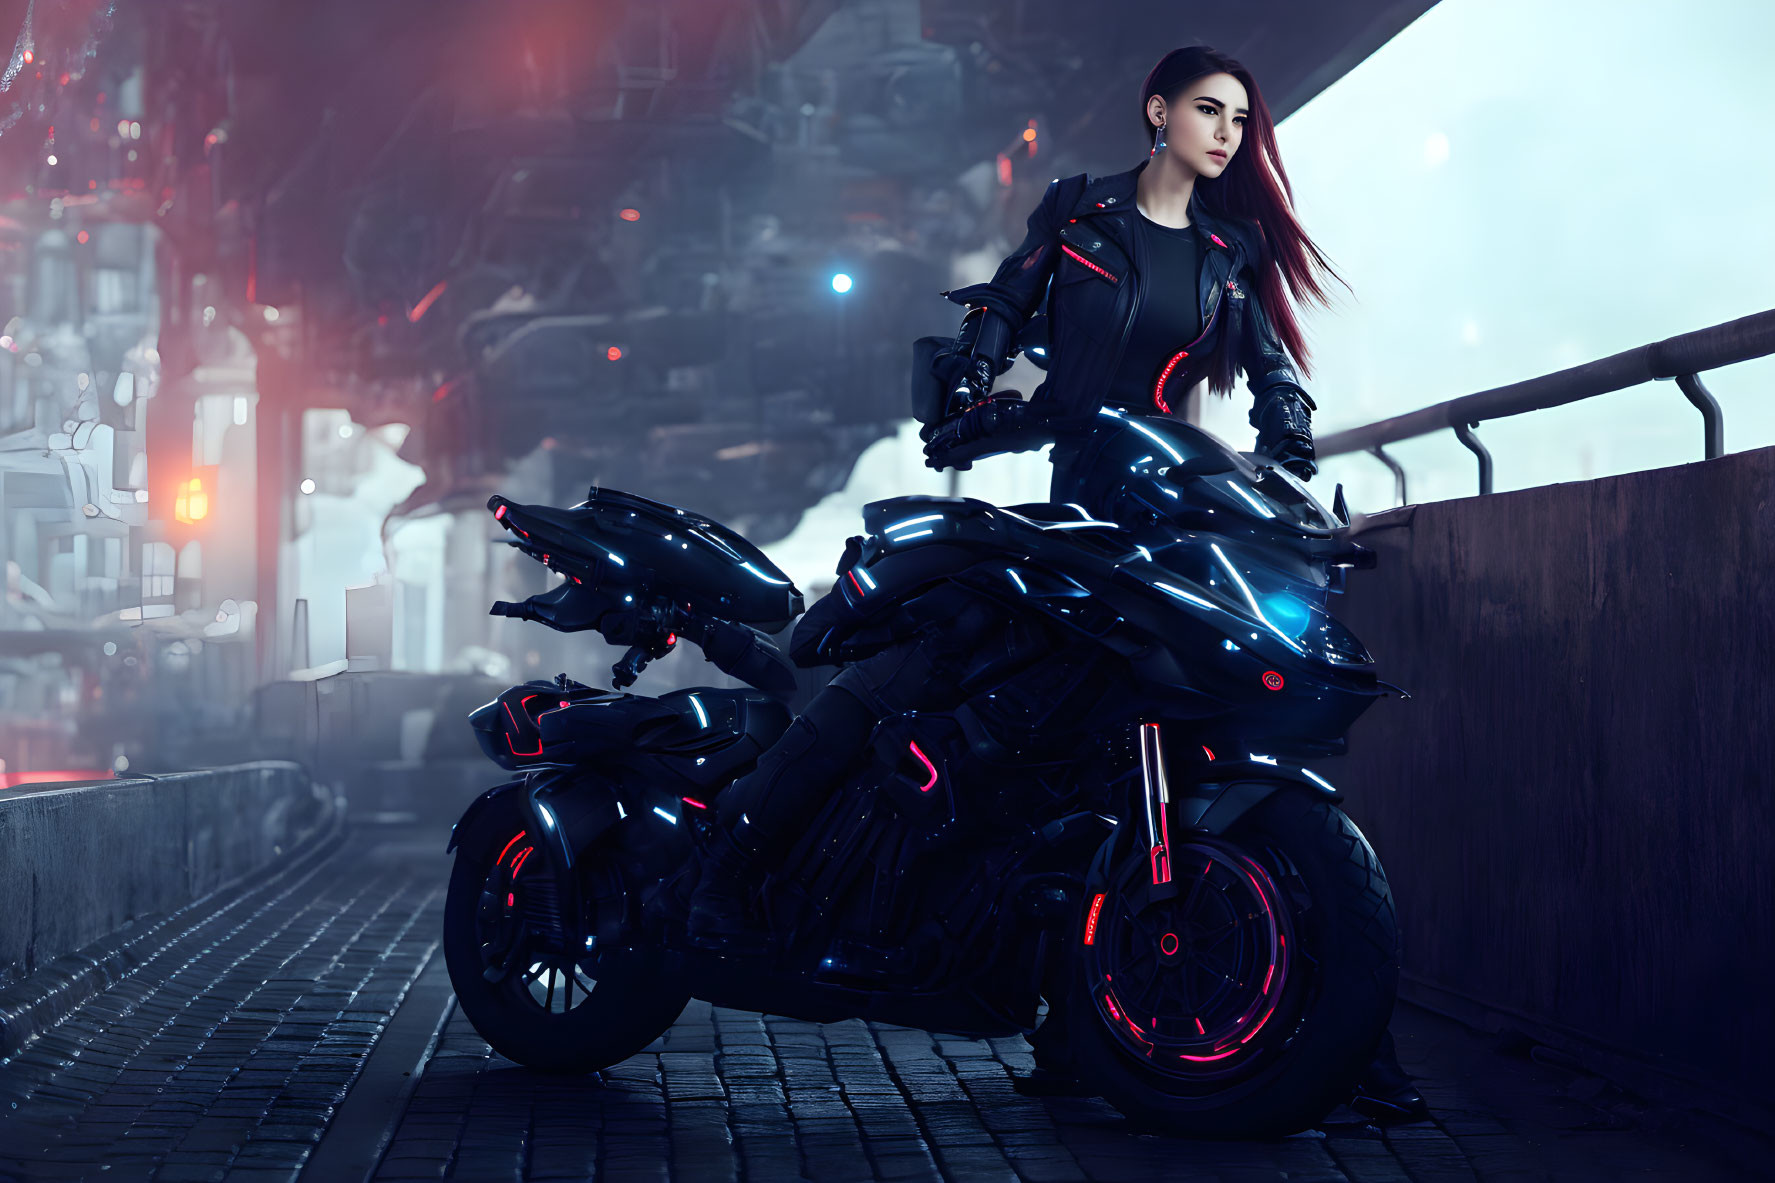 Futuristic woman in black outfit with glowing red motorcycle in industrial setting